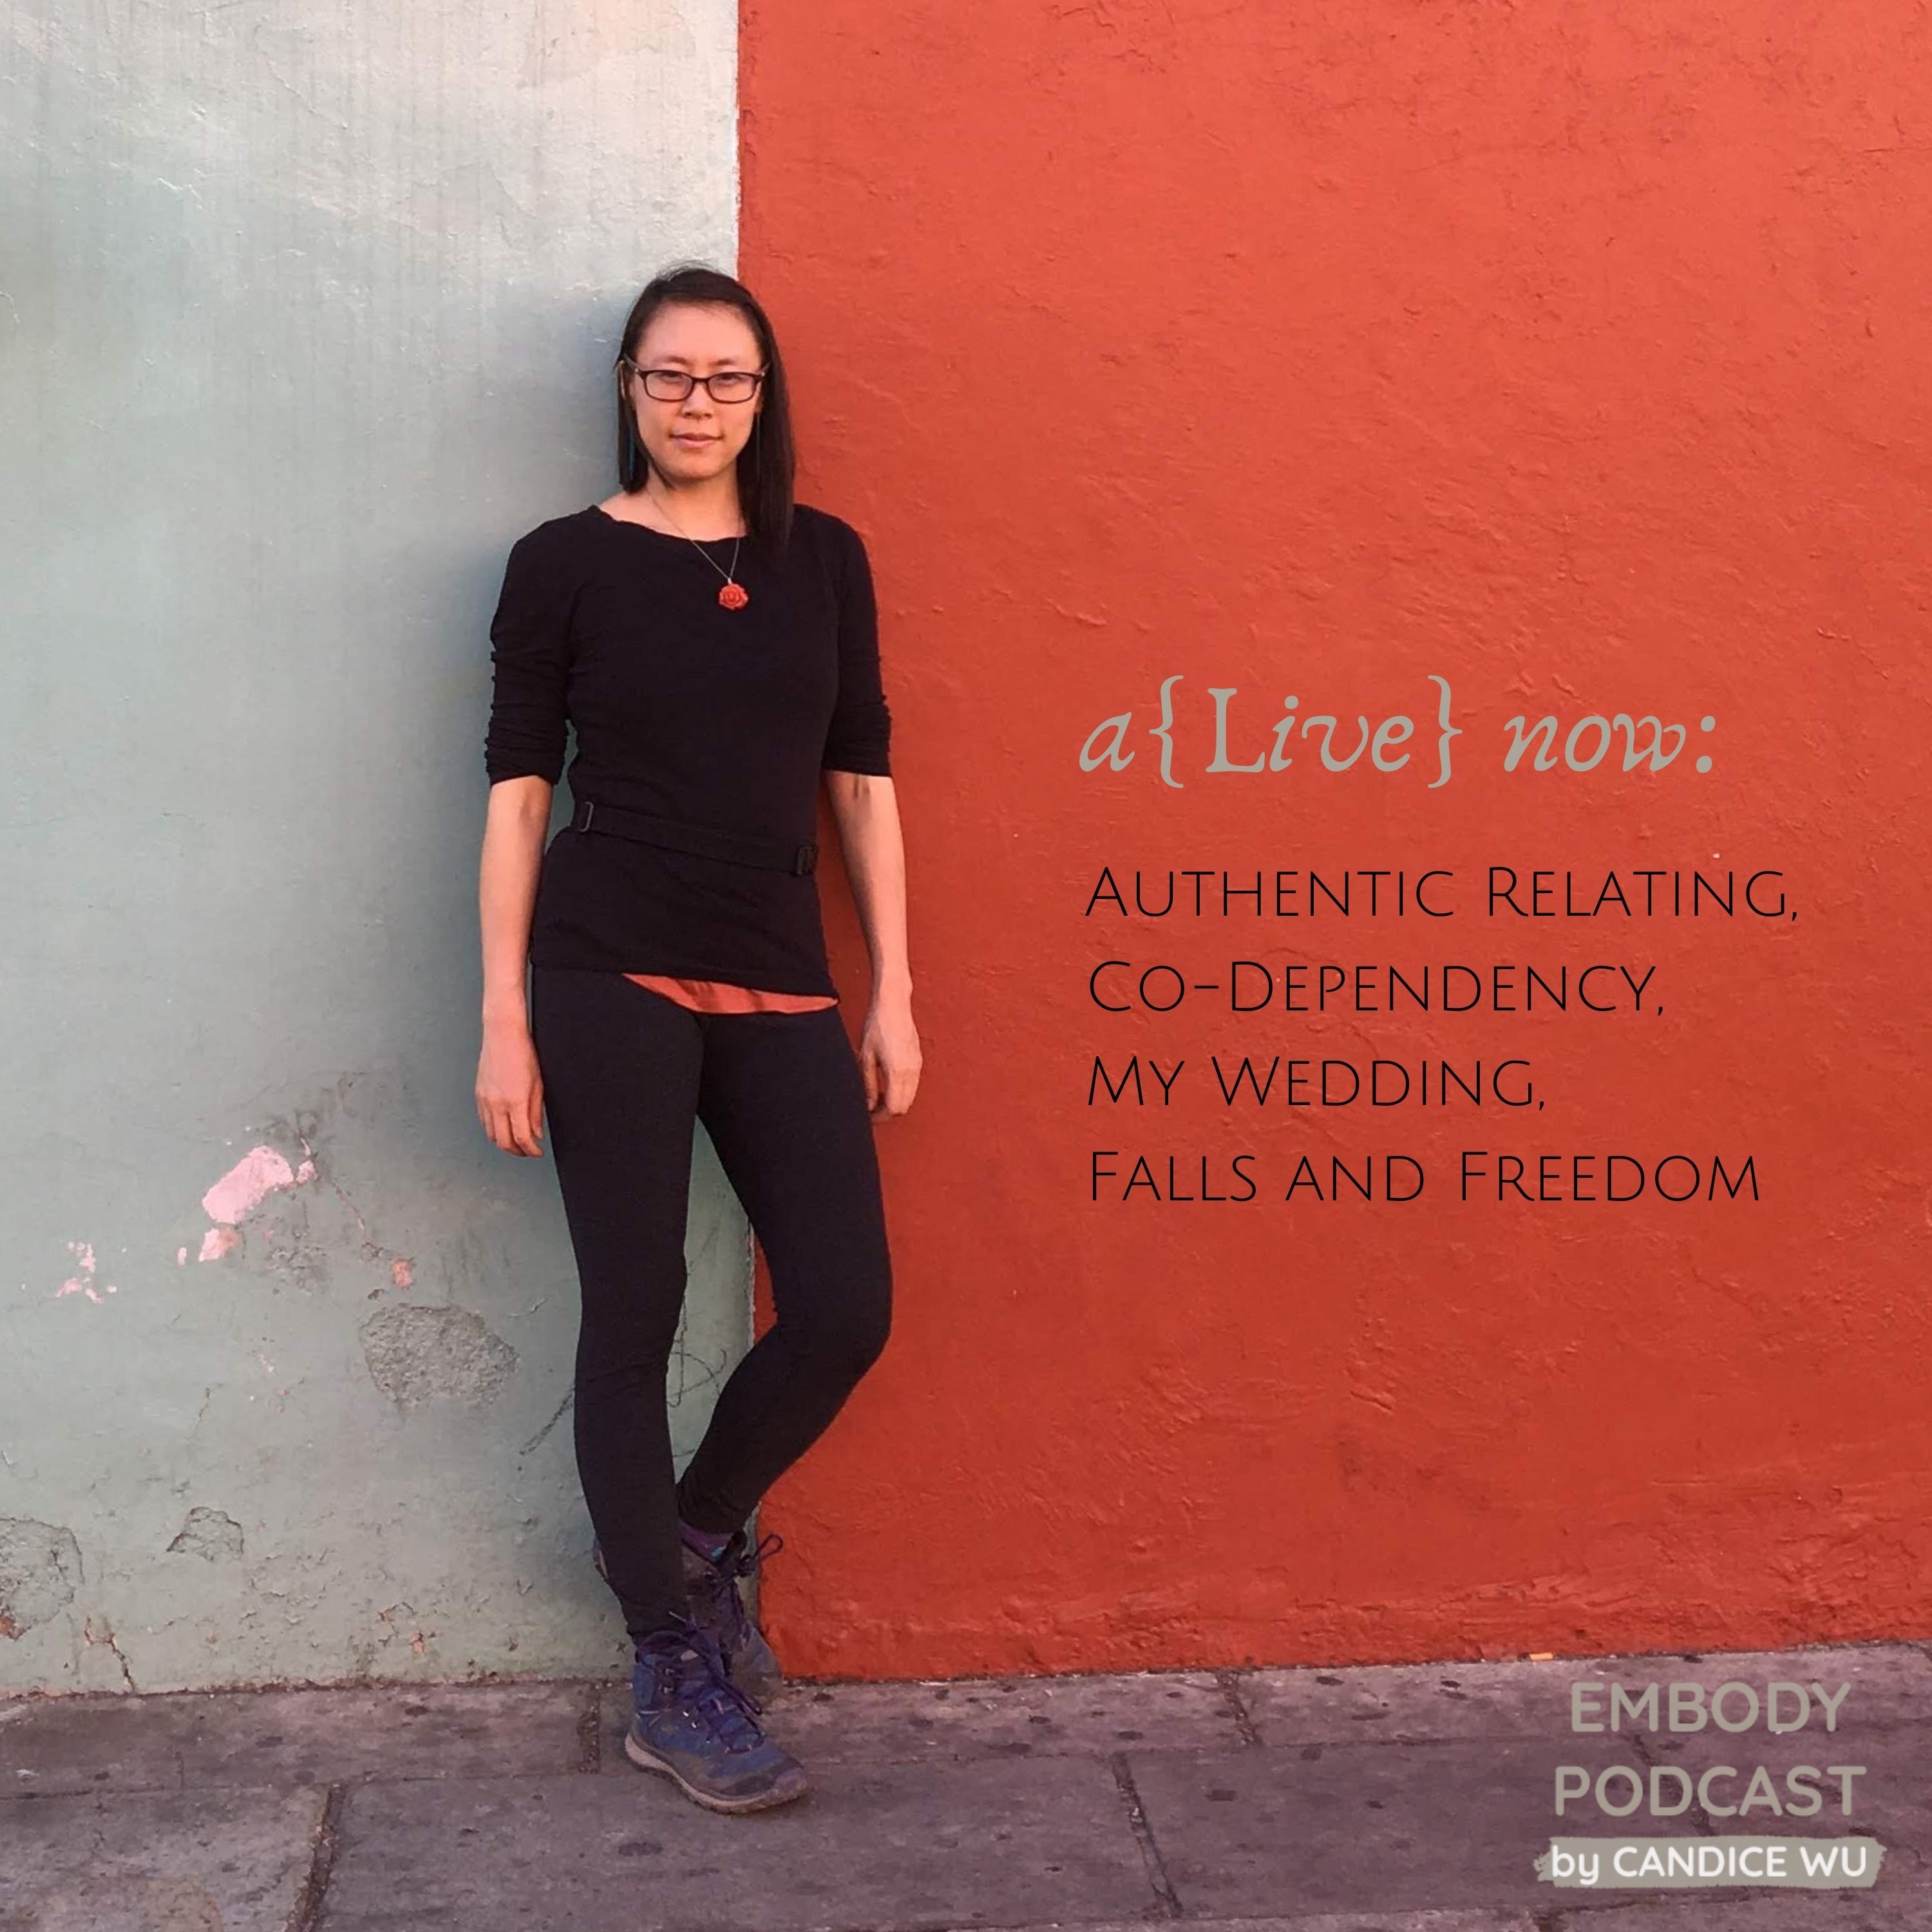 133: A{Live} Now: Authentic Relating, Co-Dependency, My Wedding, Falls and Freedom